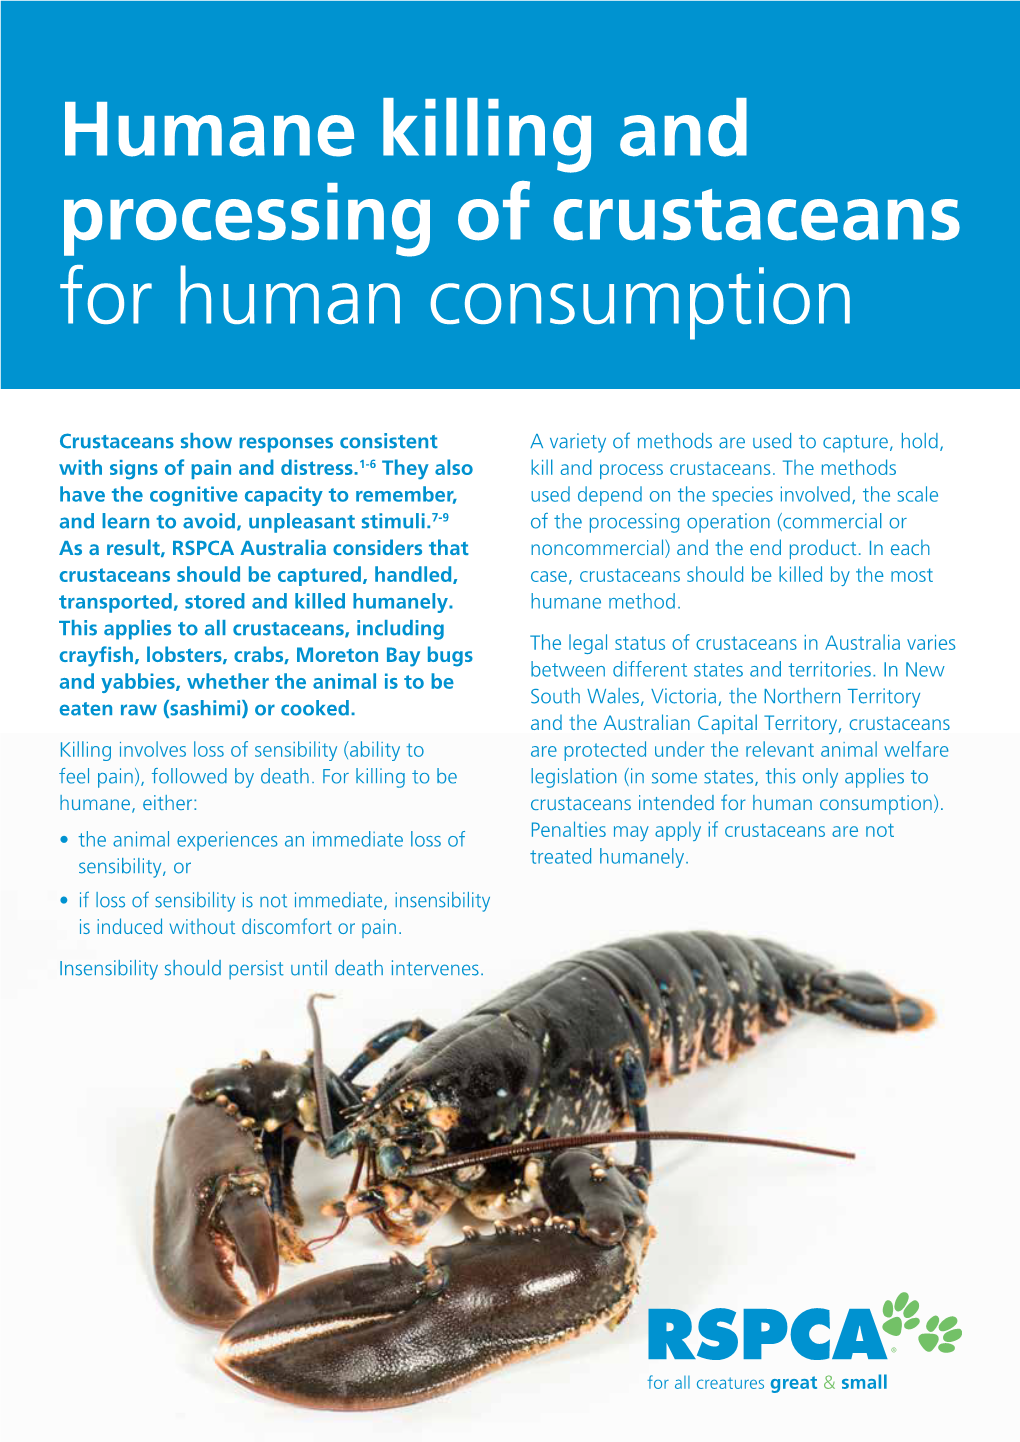 Humane Killing and Processing of Crustaceans for Human Consumption